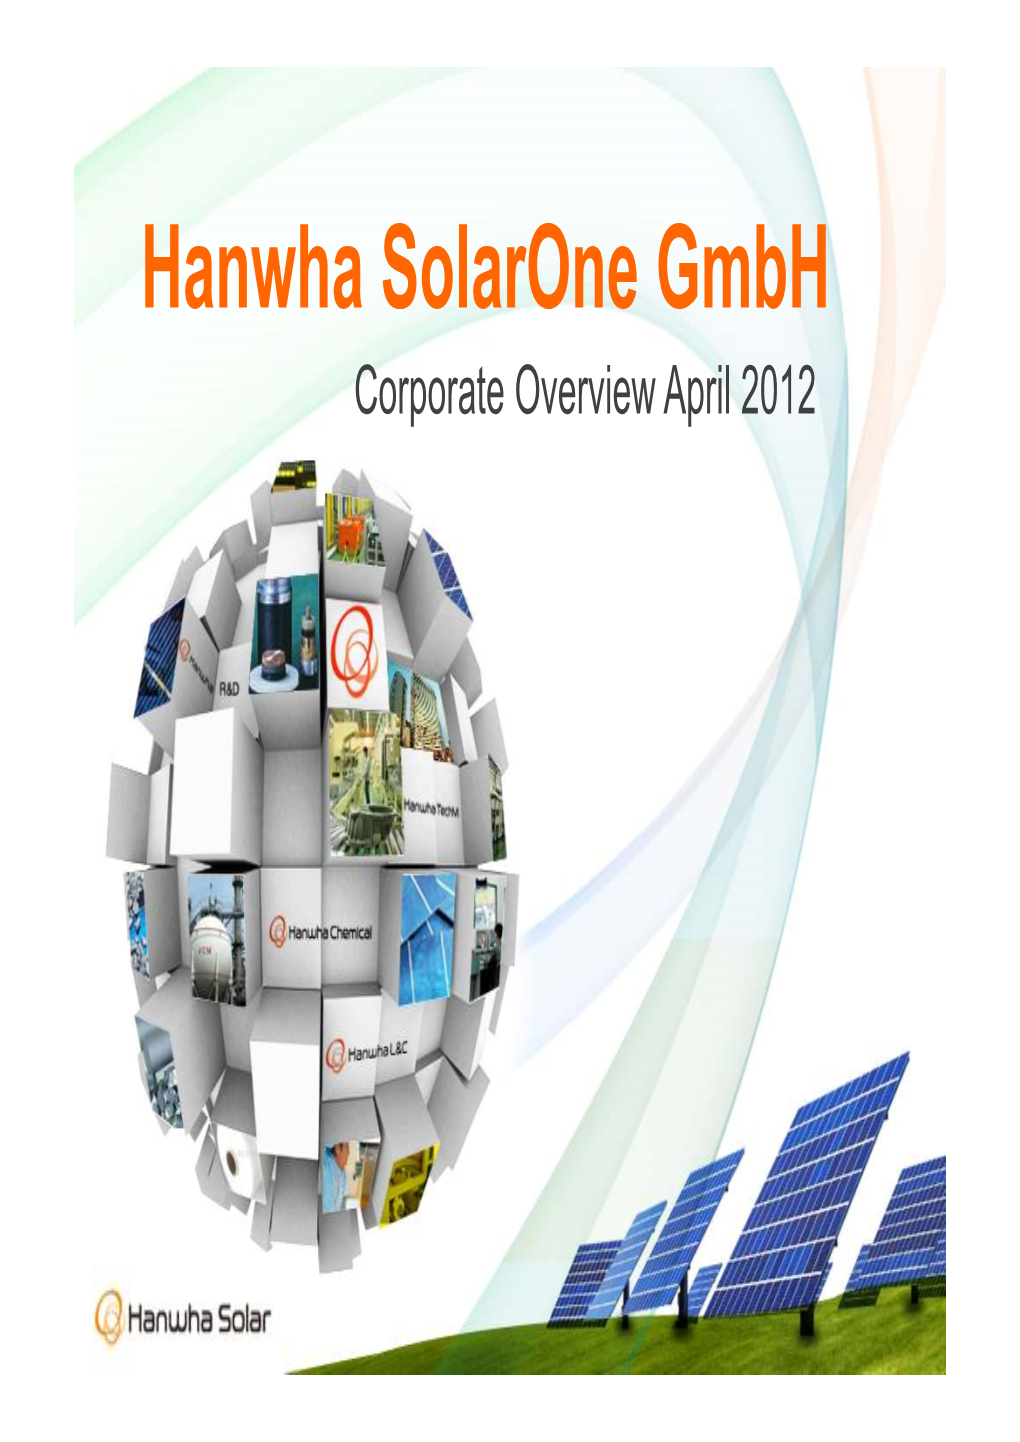 Hanwha Solarone Gmbh Corporate Overview April 2012 Reliable Partner • Supported by the Hanwha Group • Strong Balance Sheet • Cost Structure